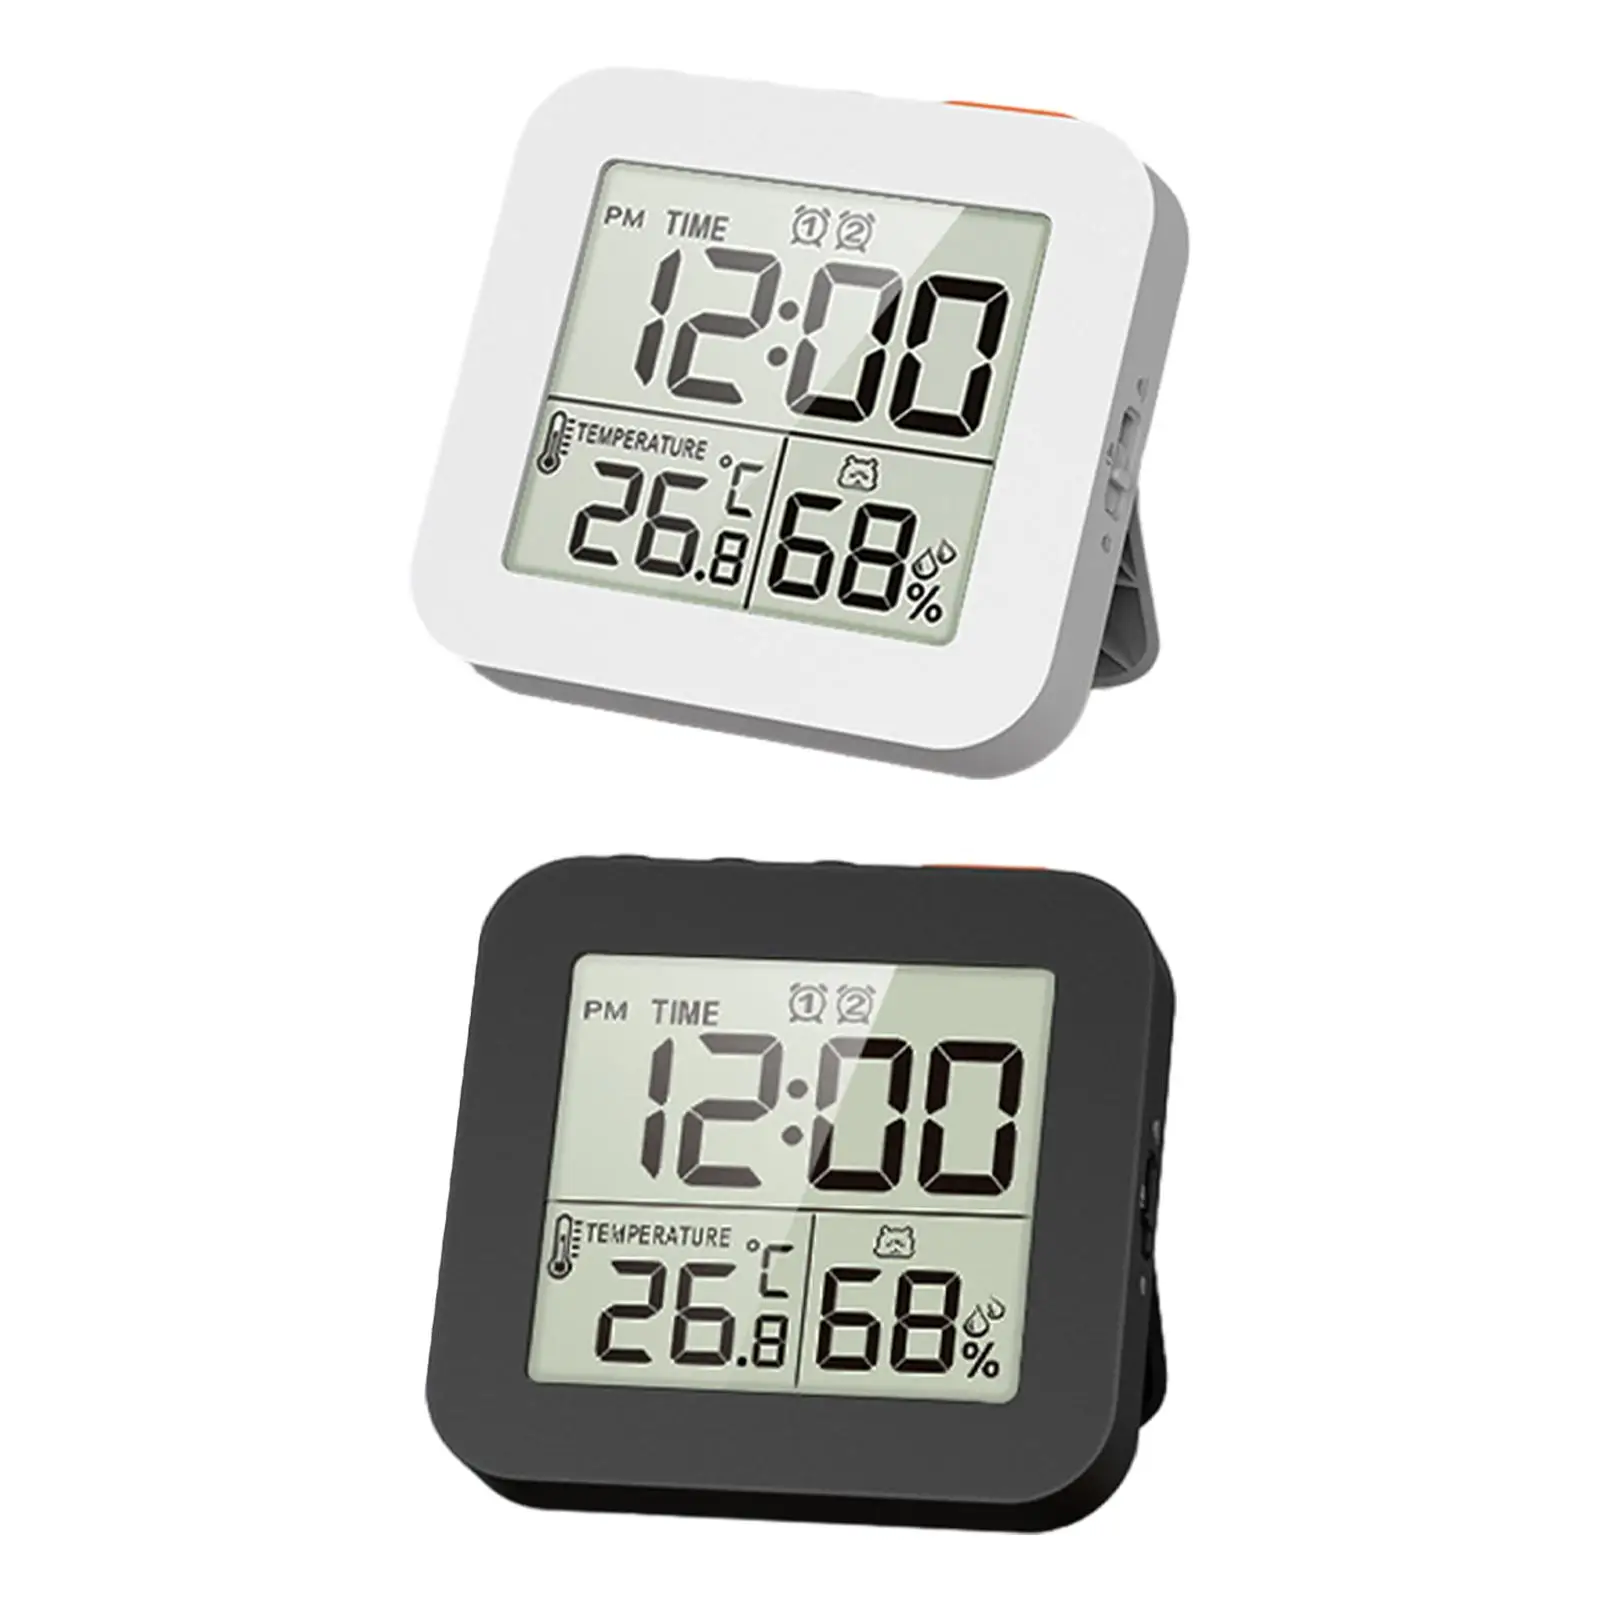  Clocks Large LCD Display for Business Professional Makeup Teacher